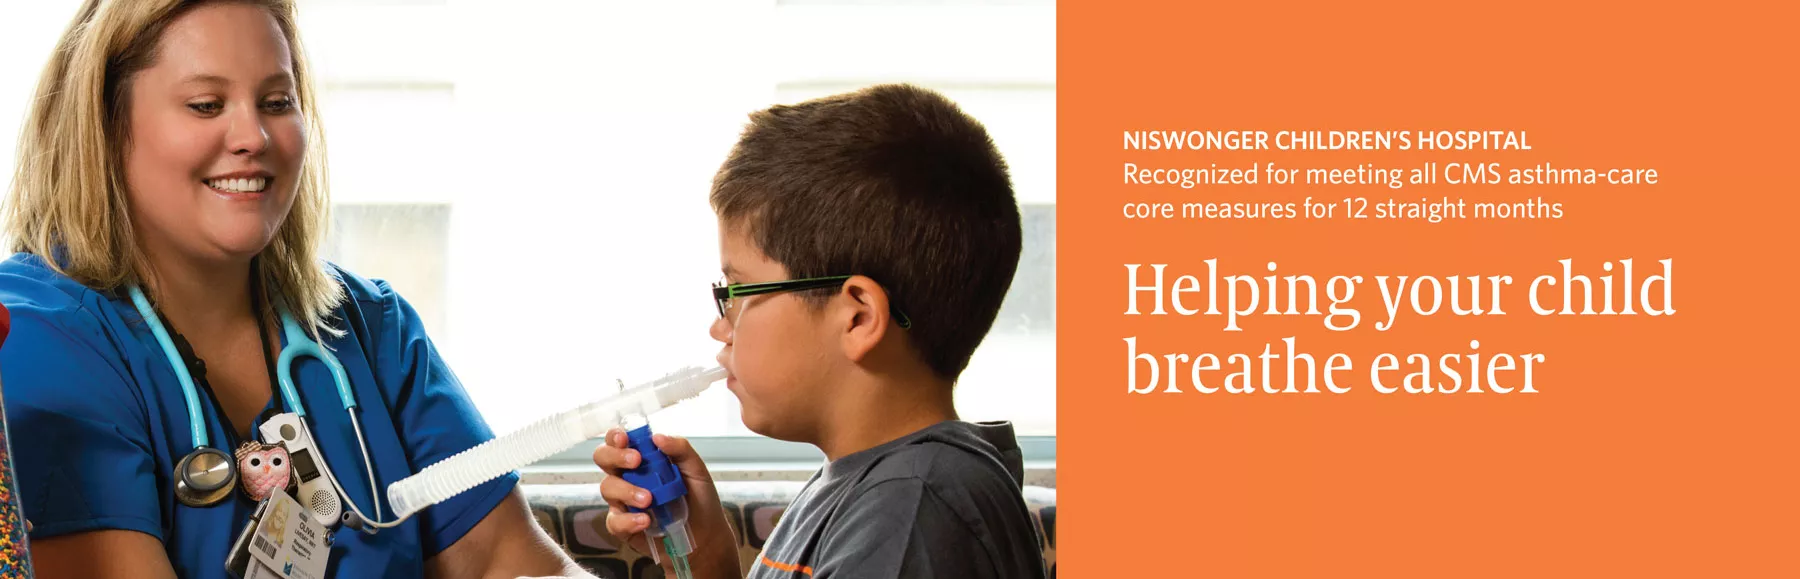 photo: nurse doing breath test with young boy patient; text: Niswonger Children's Hospital - Recognized for meeting all CMS asthma-care core measures for 12 straight months – helping your child breathe easier